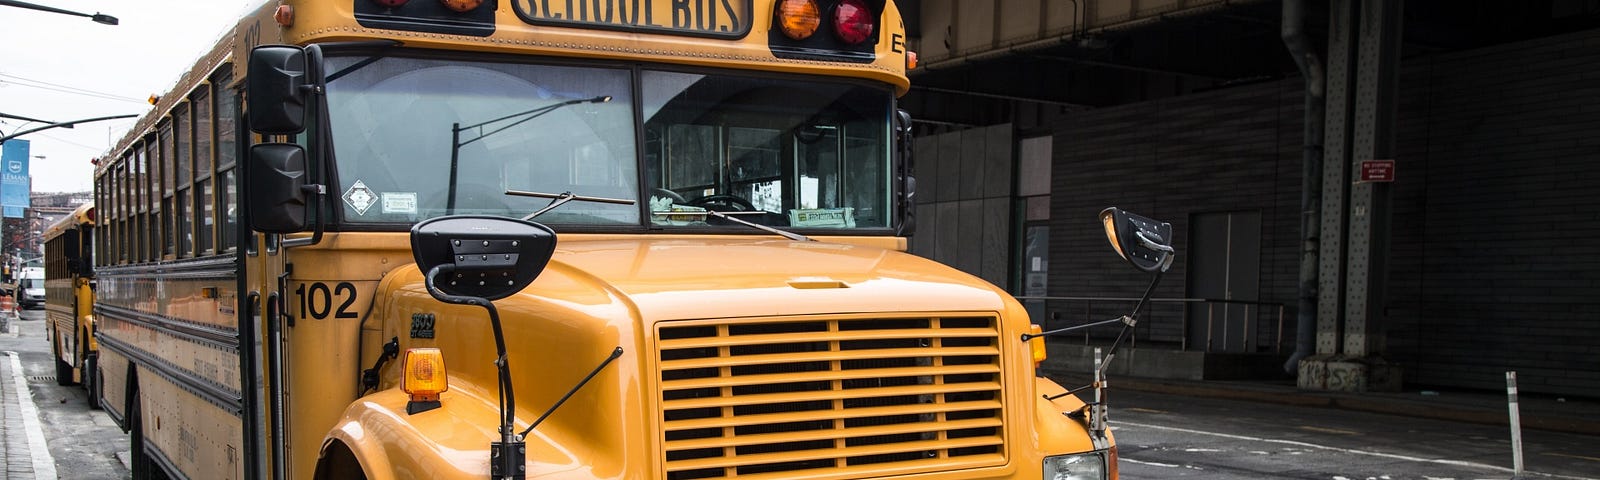 Image of a school bus to accompany reference to the children’s song, “Wheels on the Bus.”